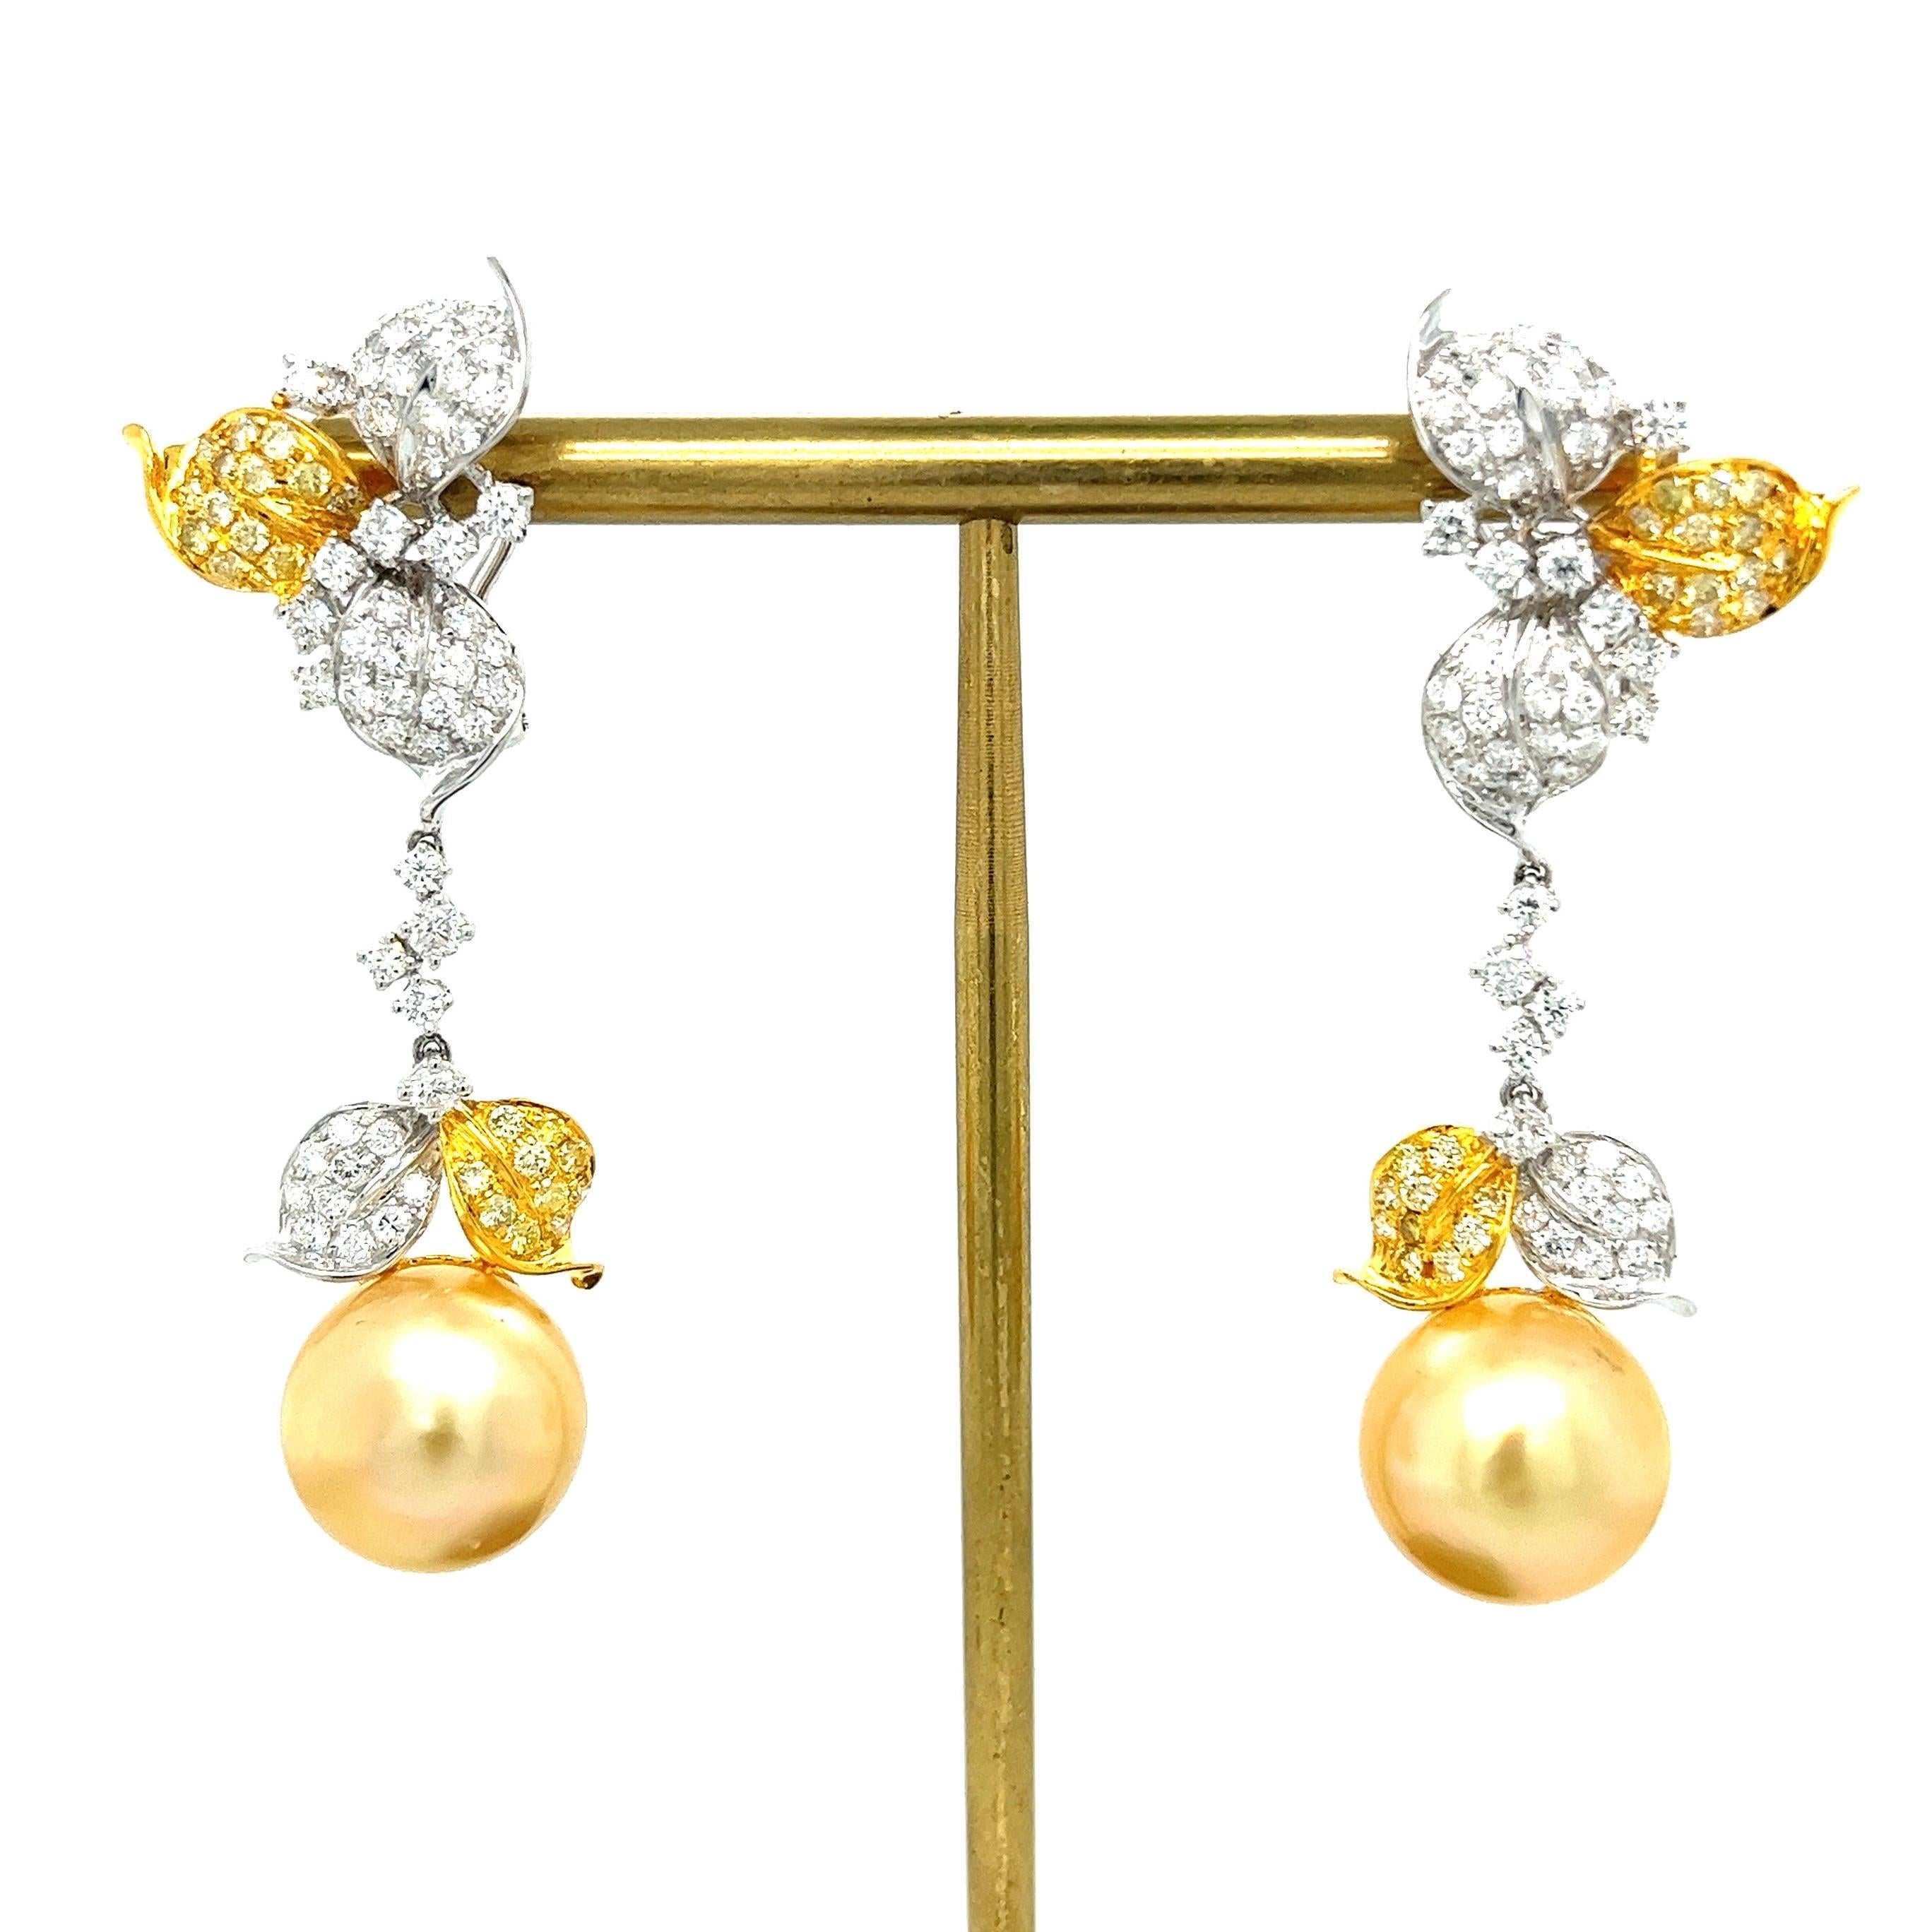 18K White Gold Pearl & Diamond Drop Earrings

2 Pearls - 13MM
142 Diamonds - 3.10 CT
18K White Gold - 12.37 GM

The Althoff Jewelry 18K white gold earrings feature flawless golden pearls, reminiscent of pure gold, complemented by petal-shaped